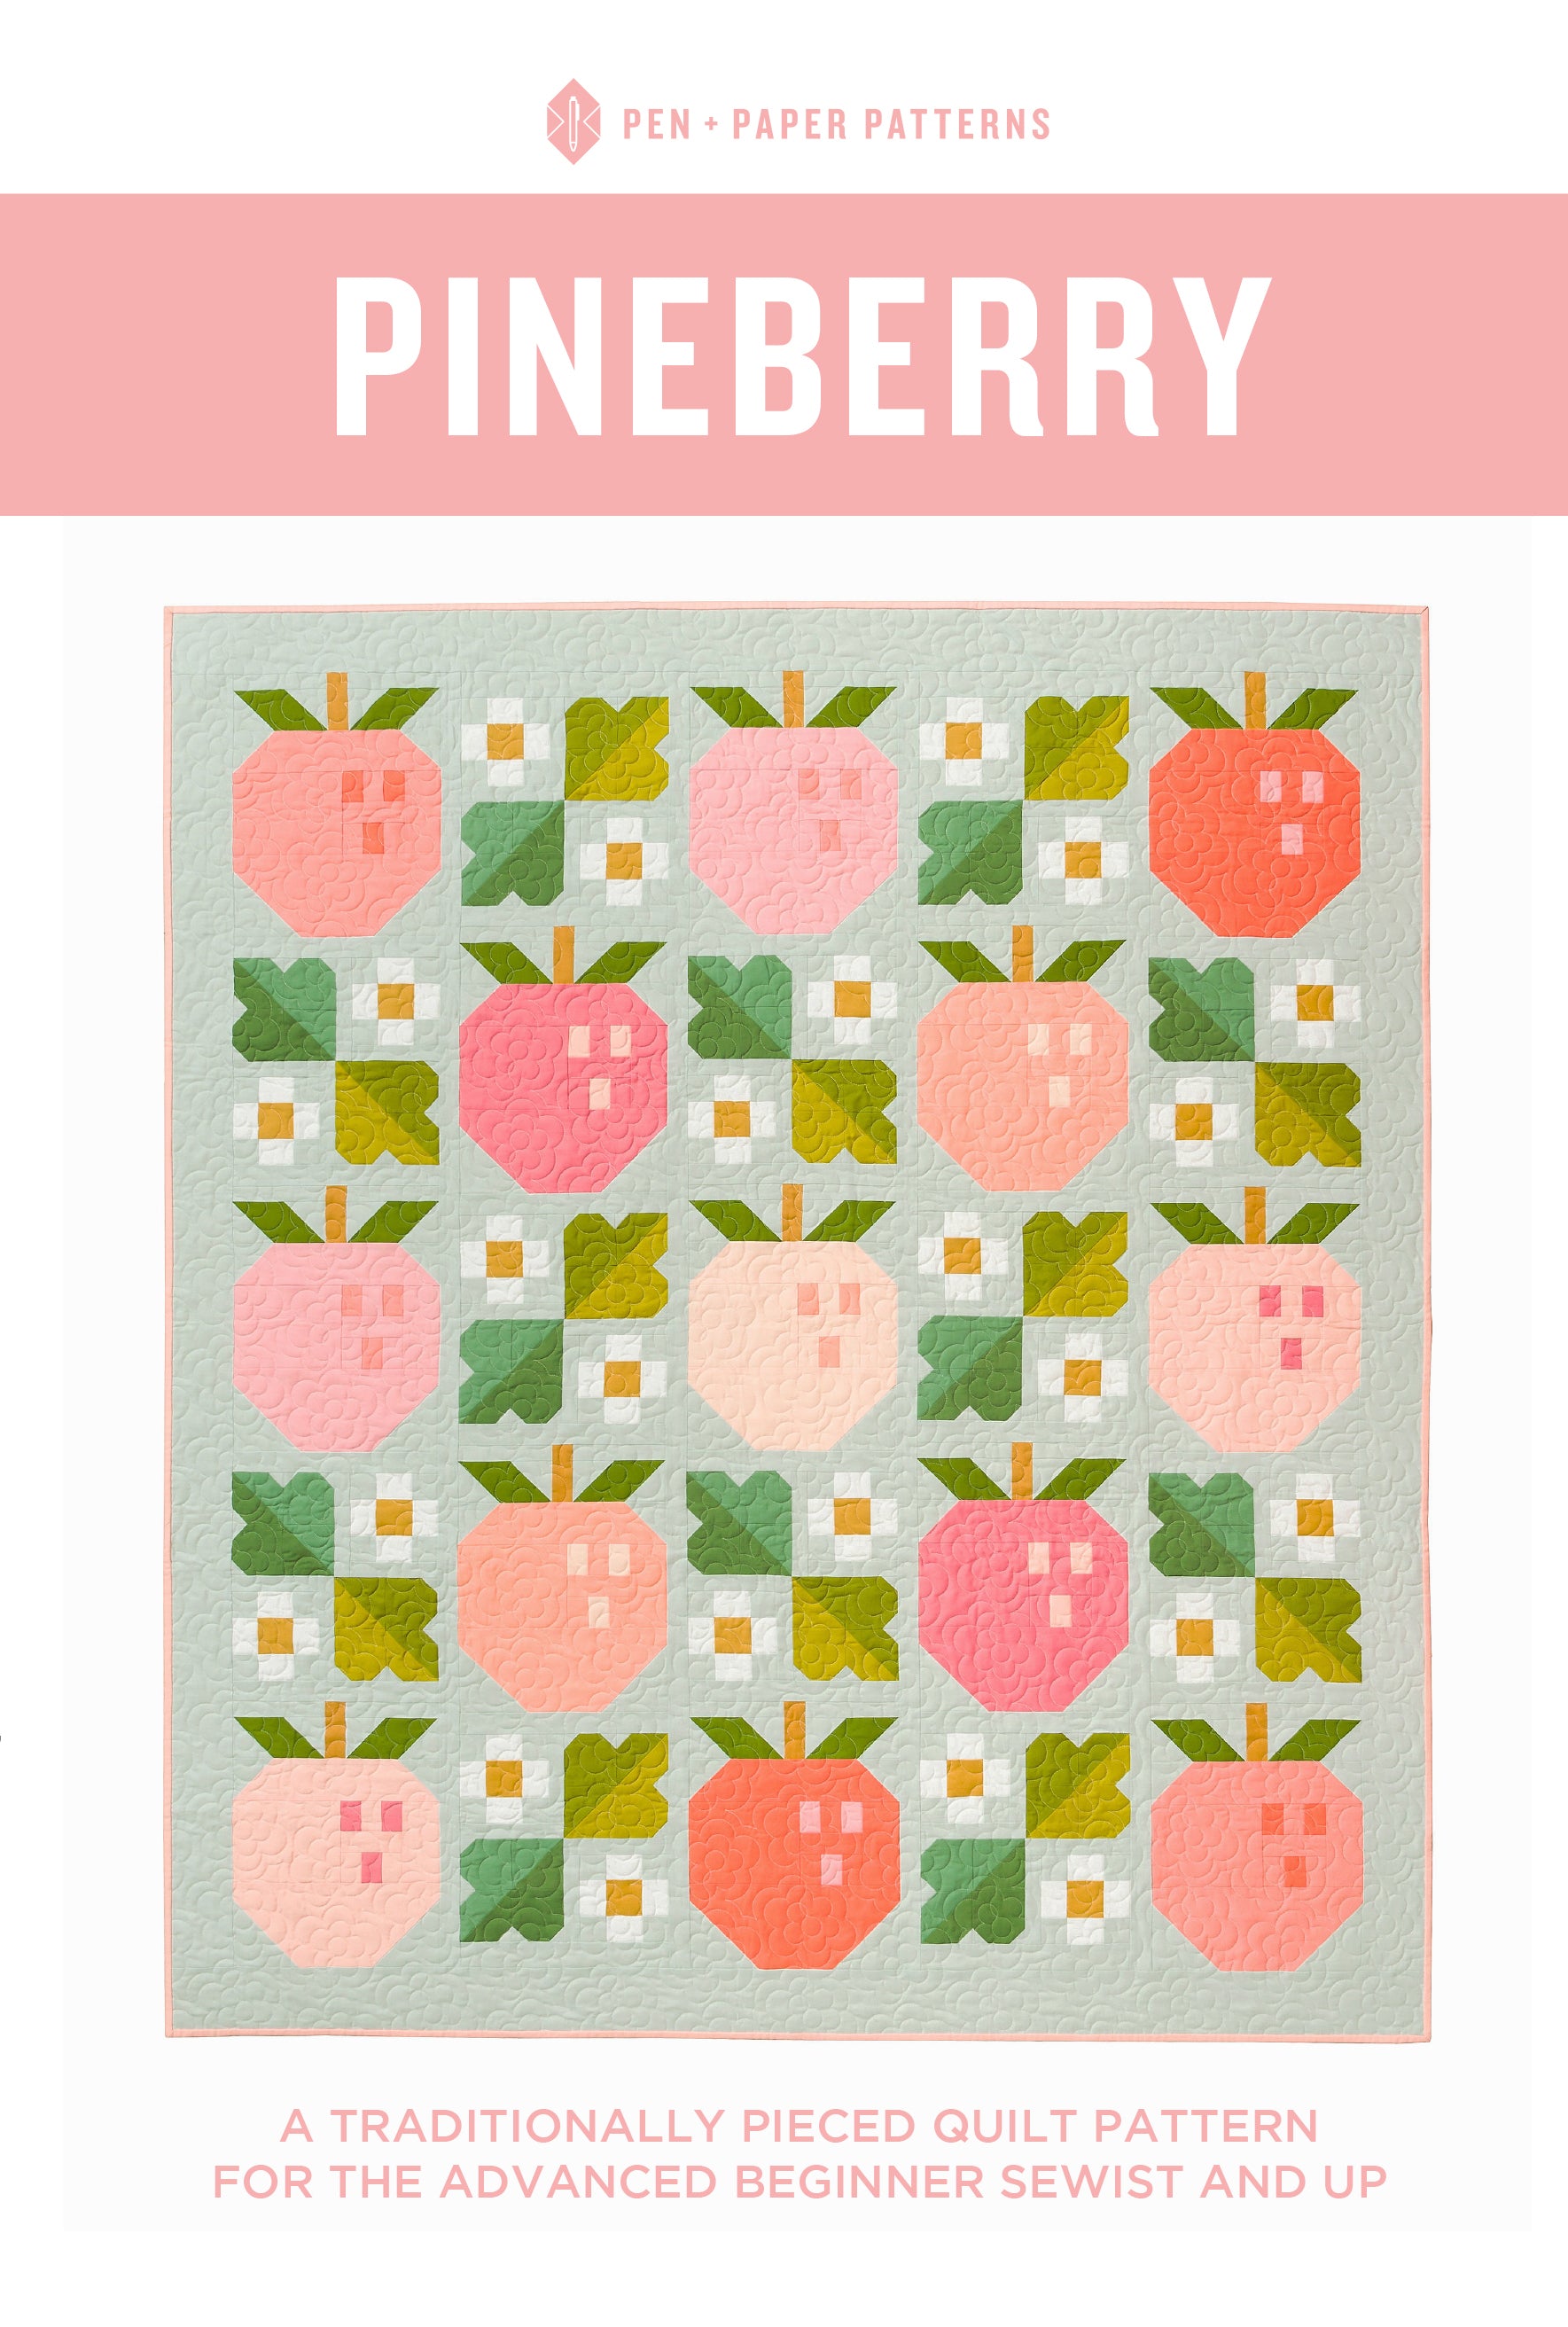 Pineberry Quilt Pattern by Pen and Paper Patterns